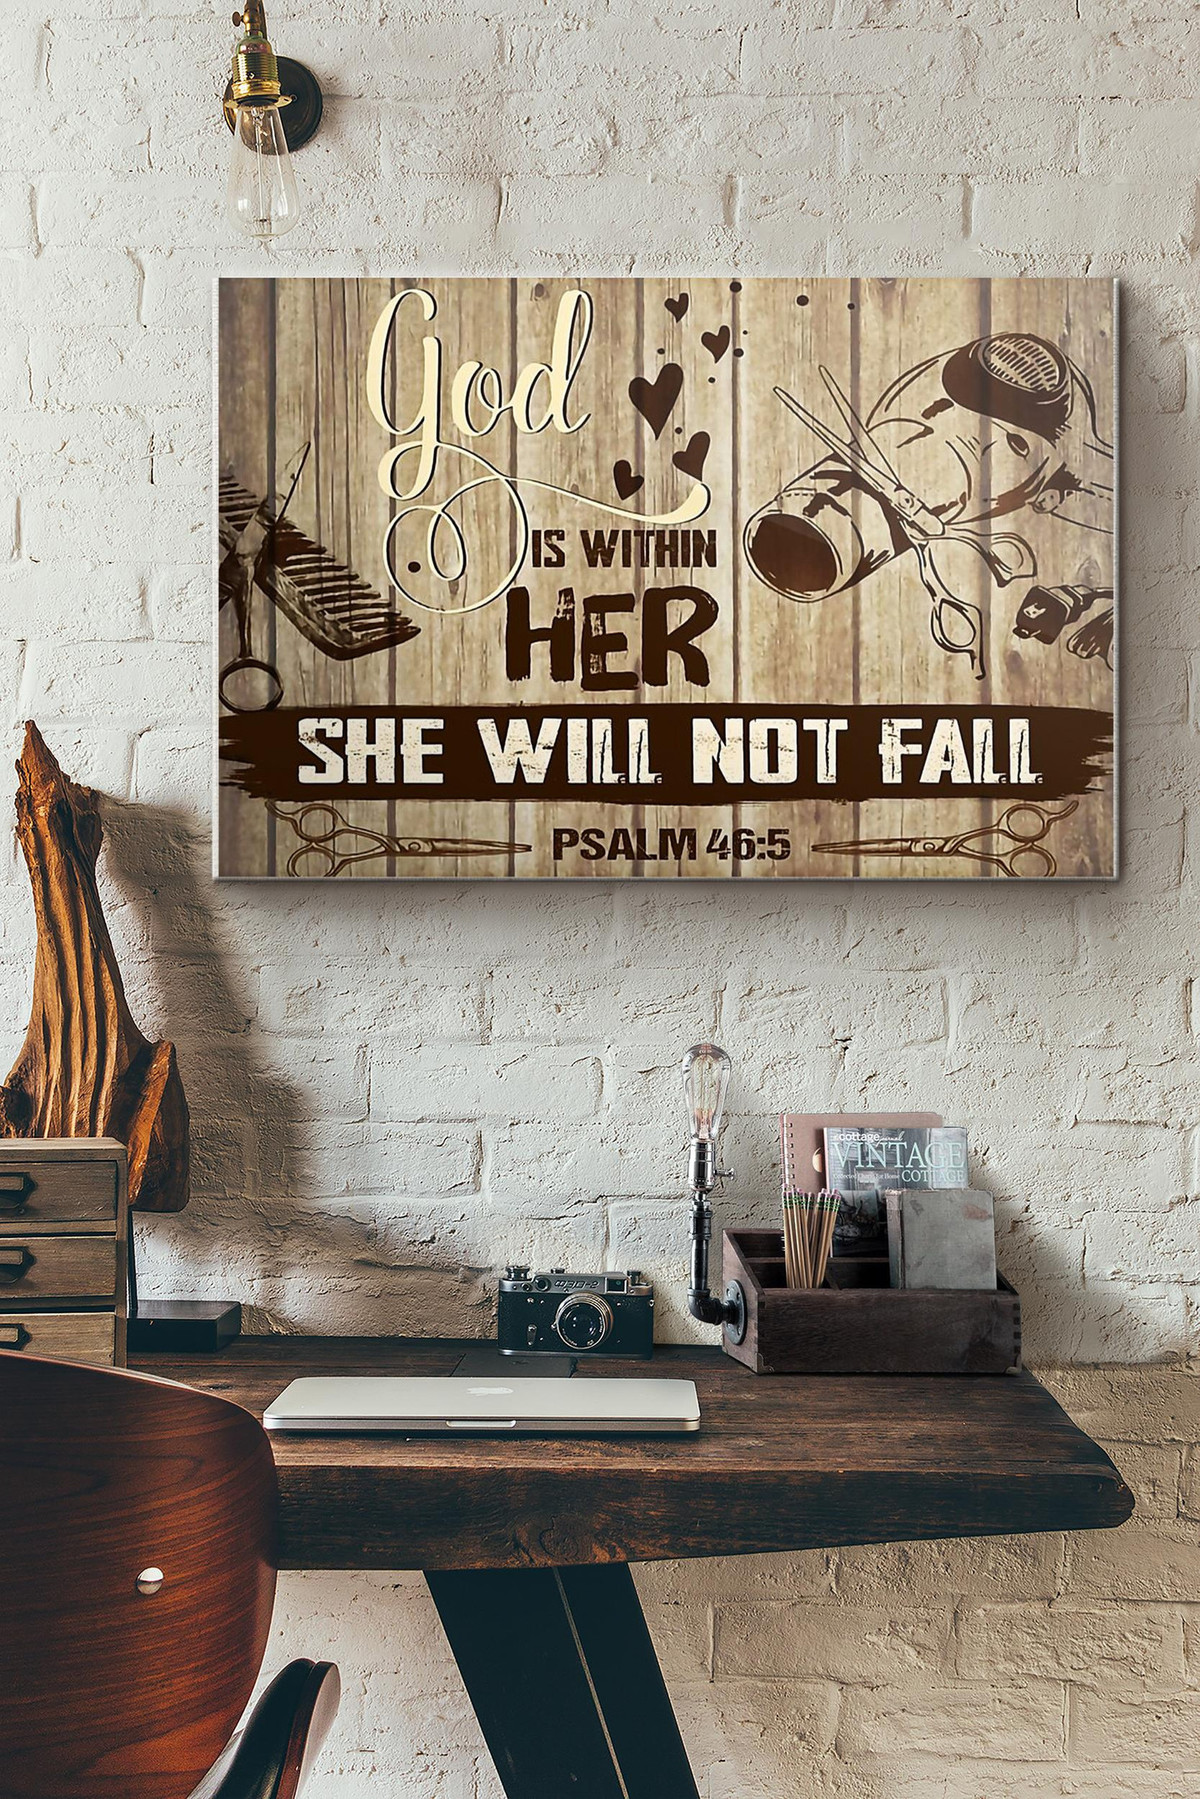 Hairstylist God Is Within Her She Will Not Fall Canvas Painting Ideas, Canvas Hanging Prints, Gift Idea Framed Prints, Canvas Paintings Wrapped Canvas 8x10